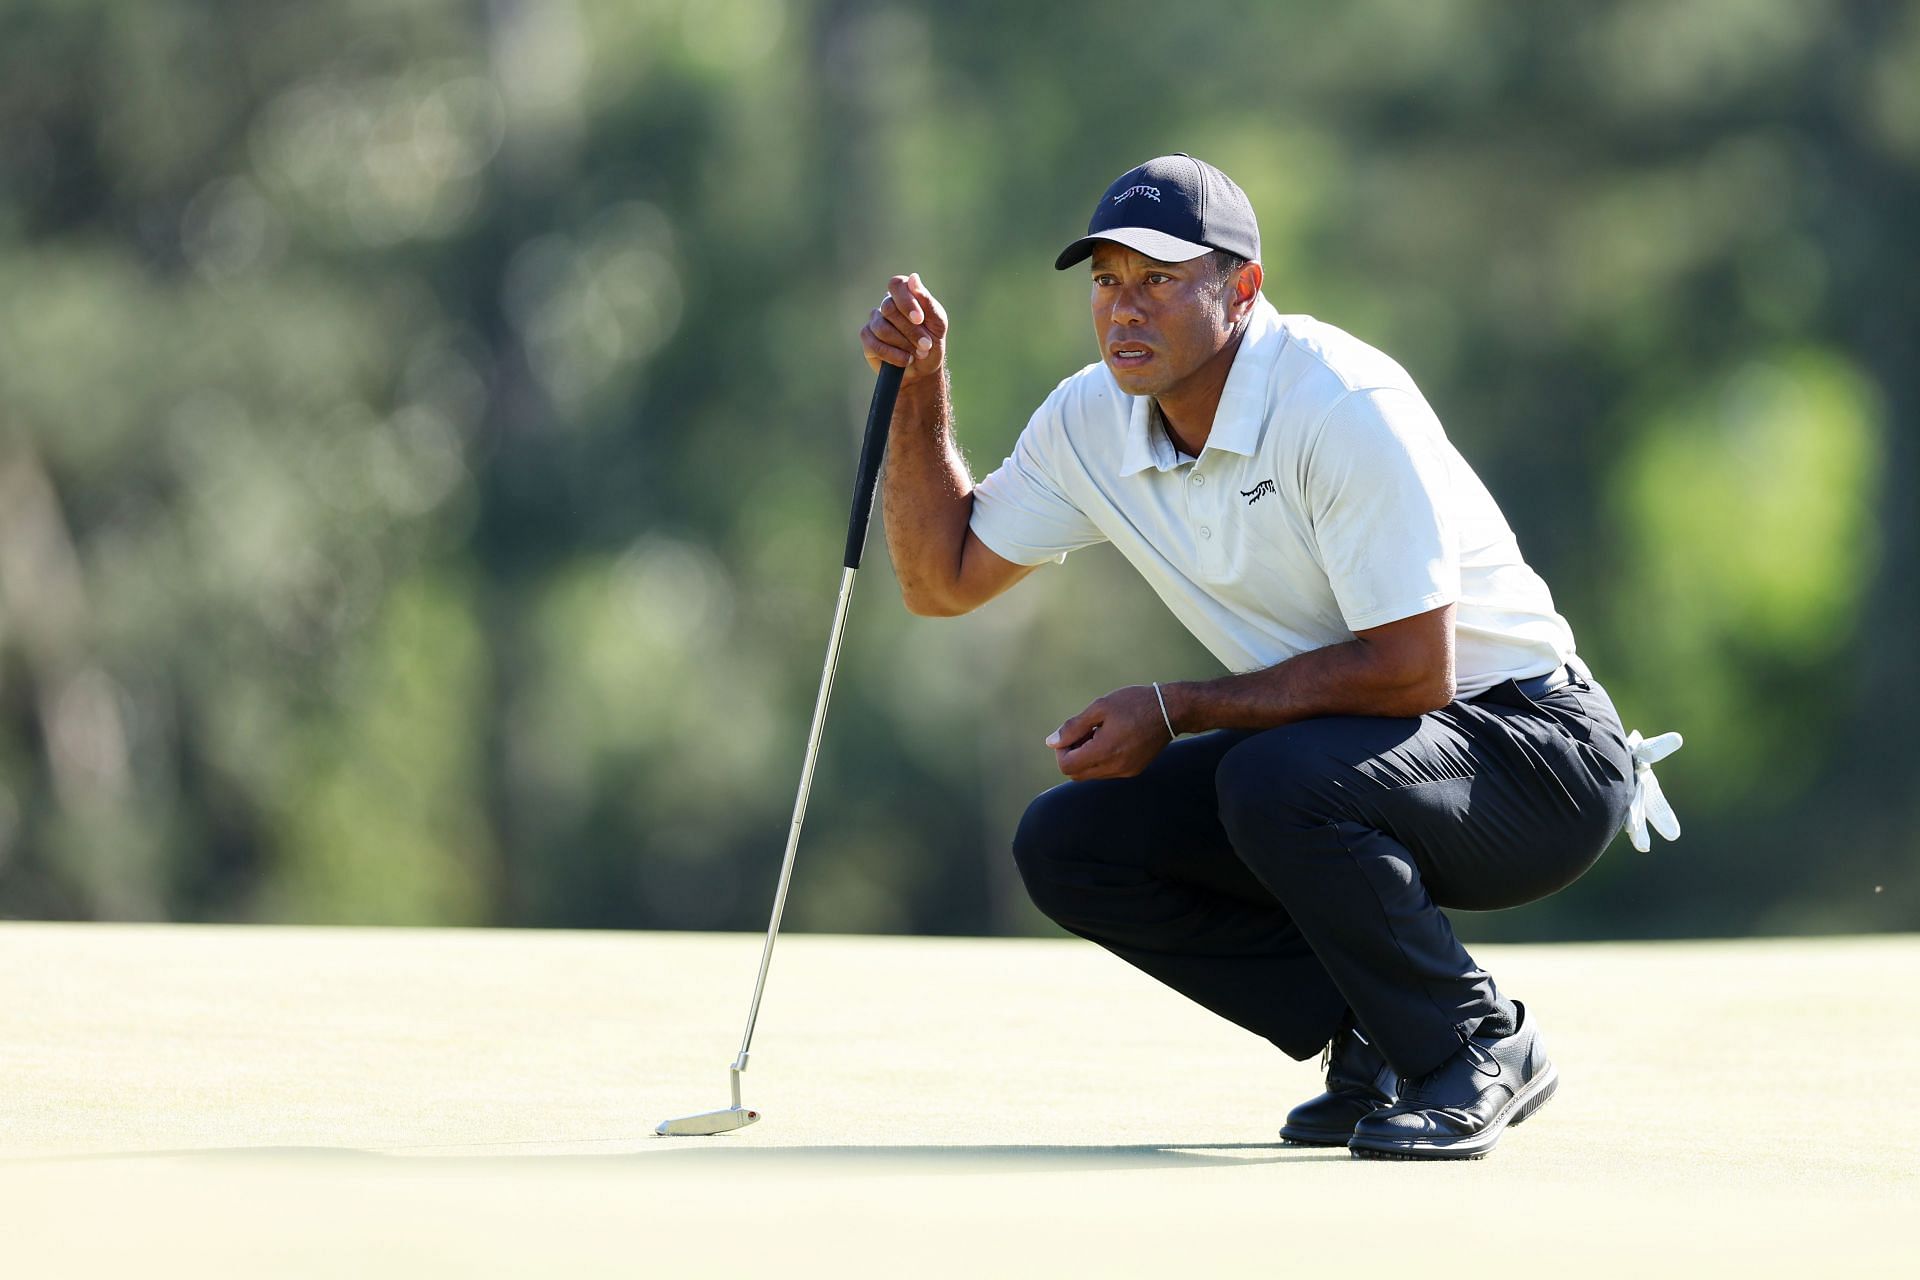 Tiger Woods is down the leaderboard